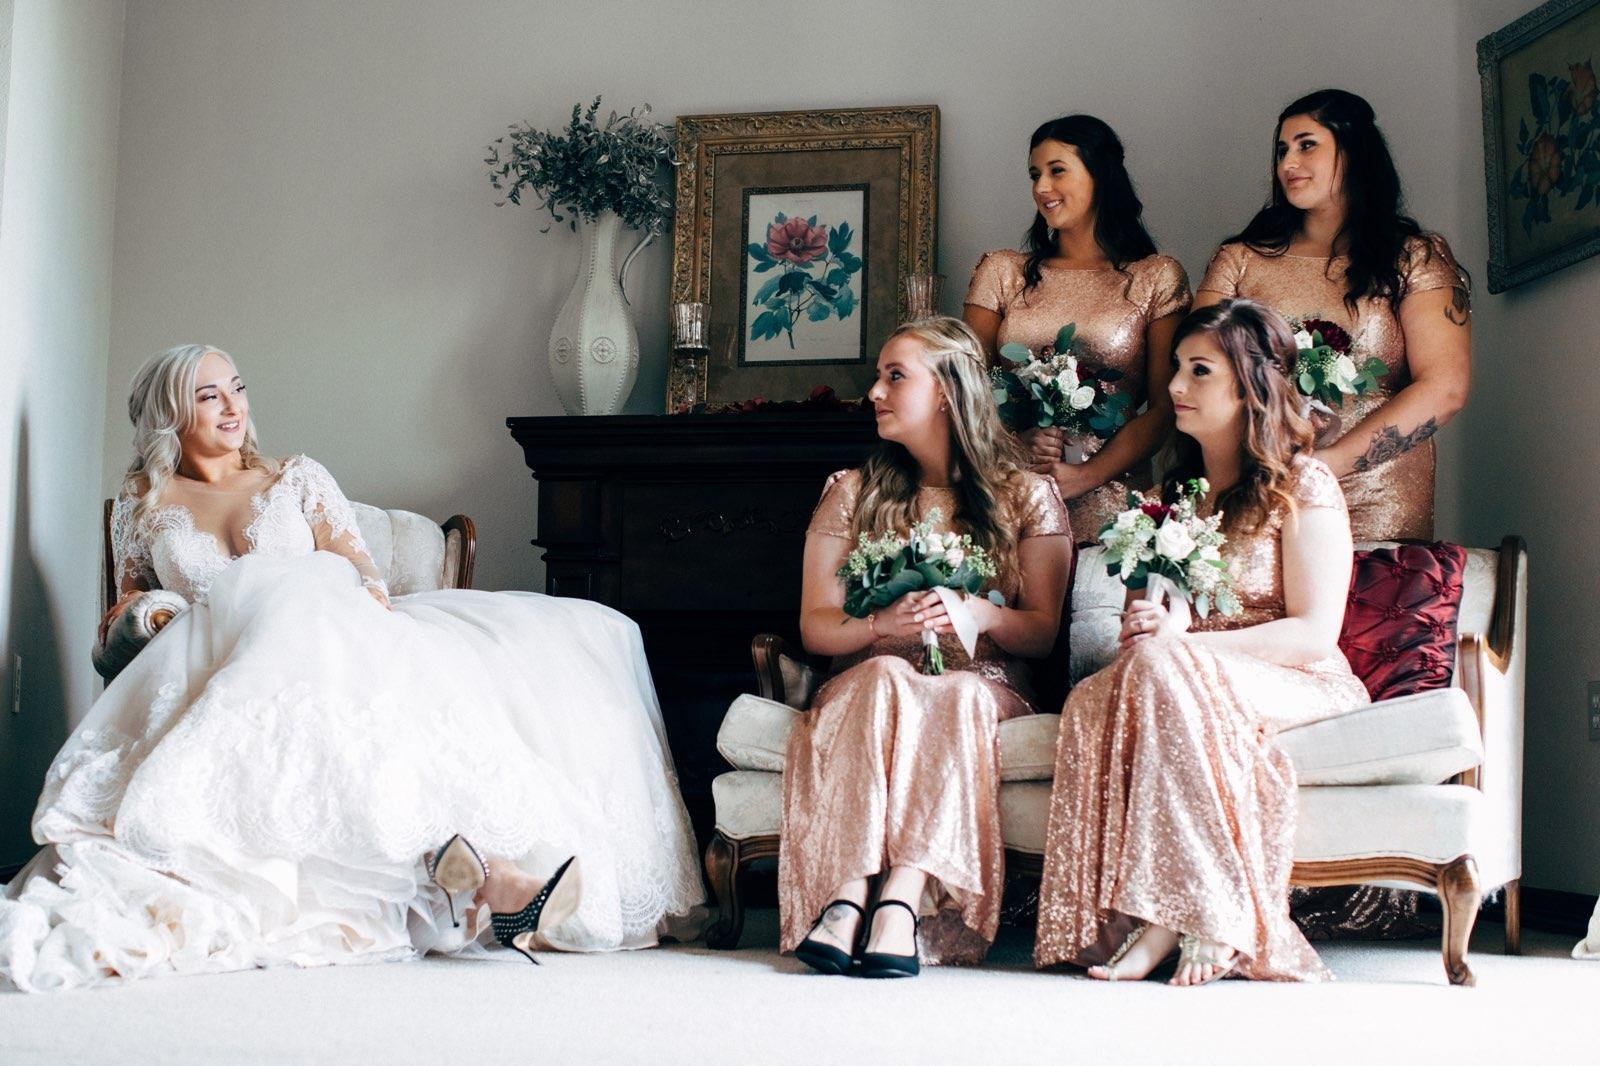 A bride and her bridesmaids | Source: Pexels